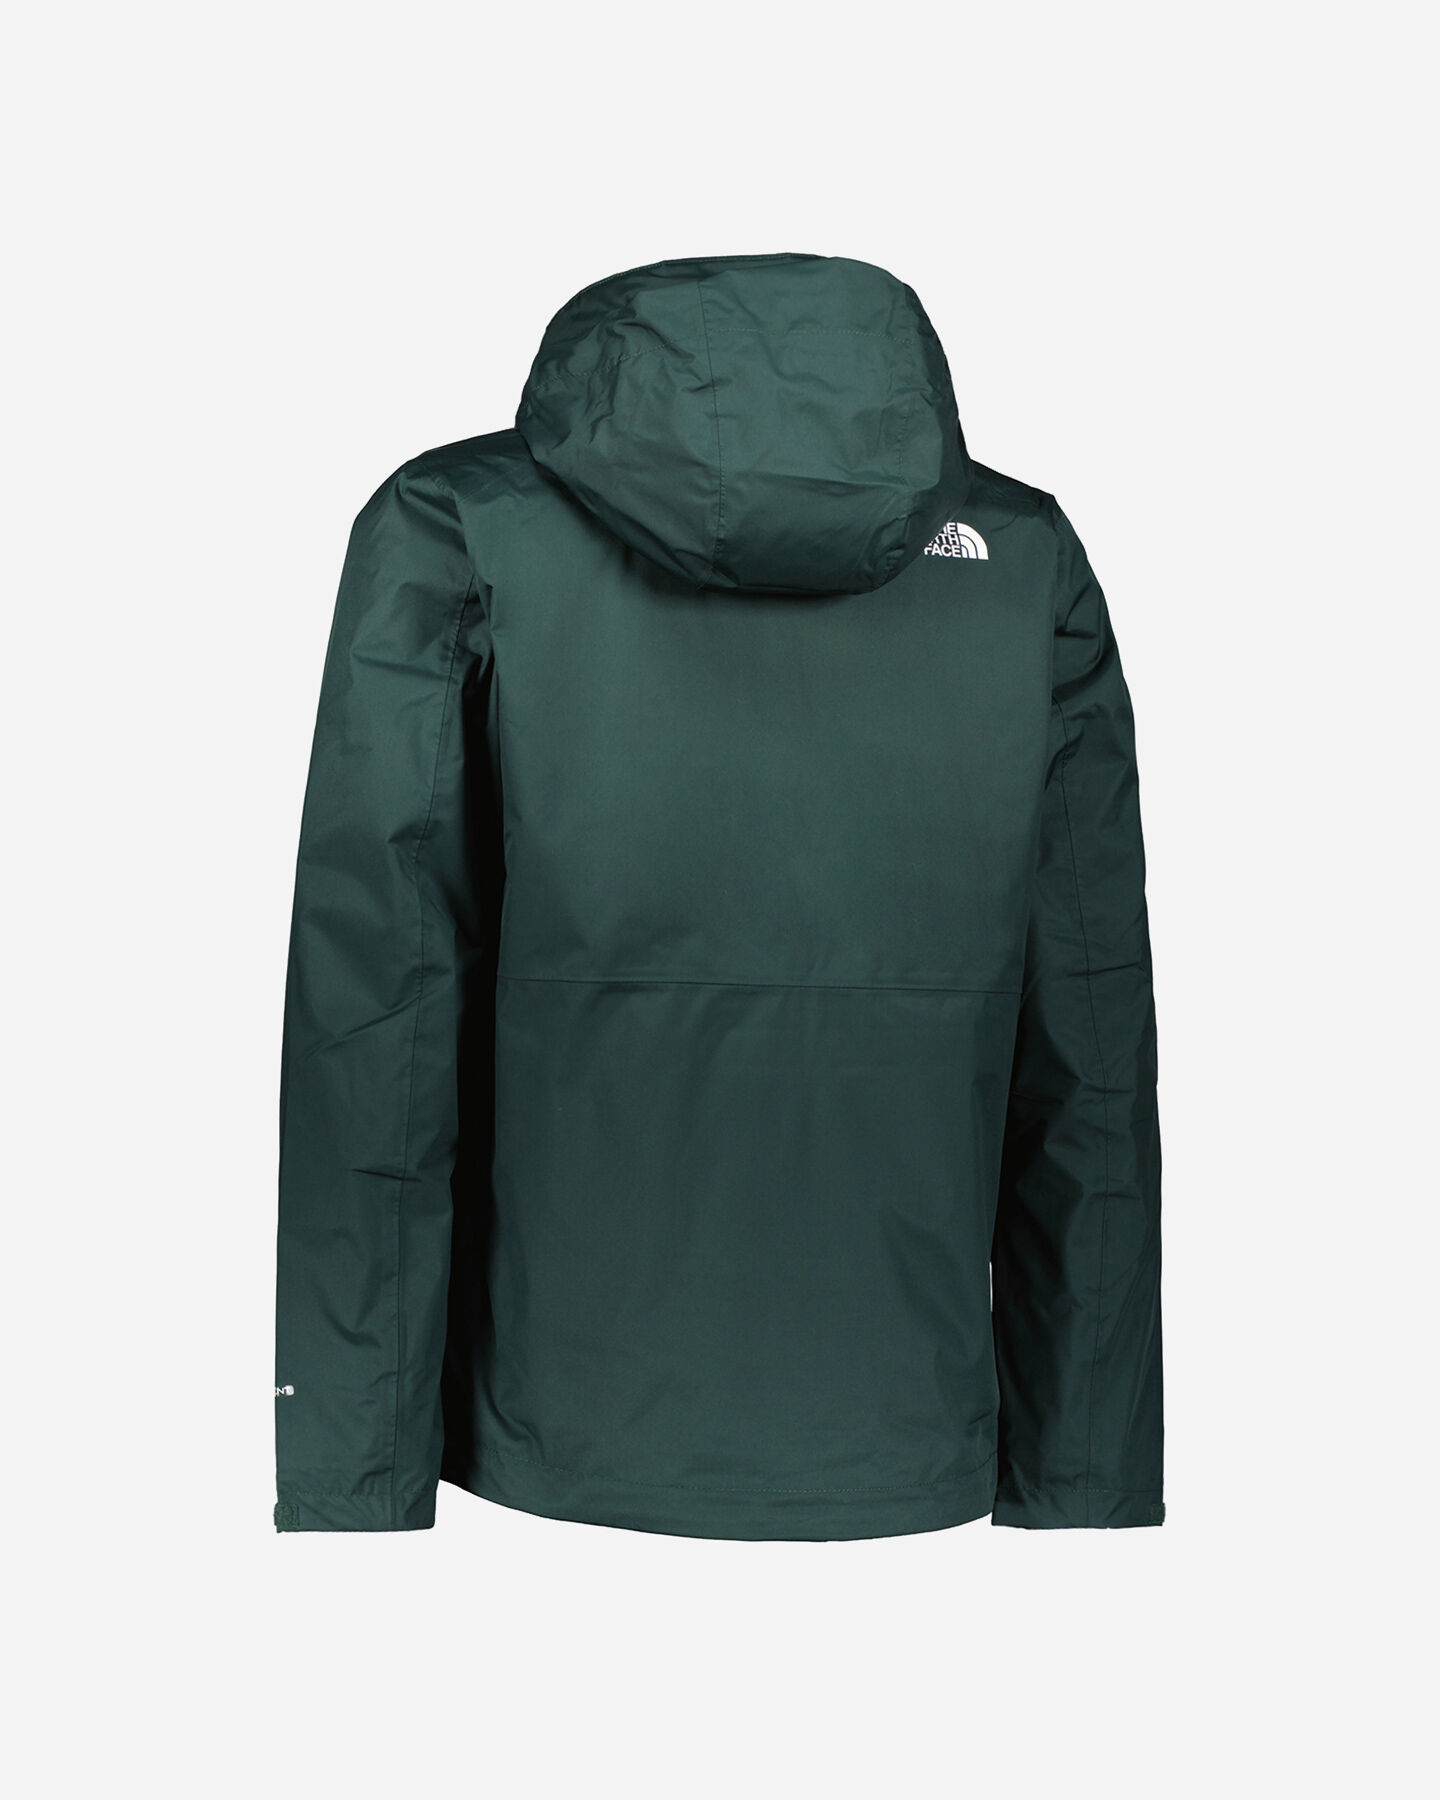  Giacca outdoor THE NORTH FACE ARASHI II DK SAGE TRICLIMATE M S5347145|D0R|S scatto 3